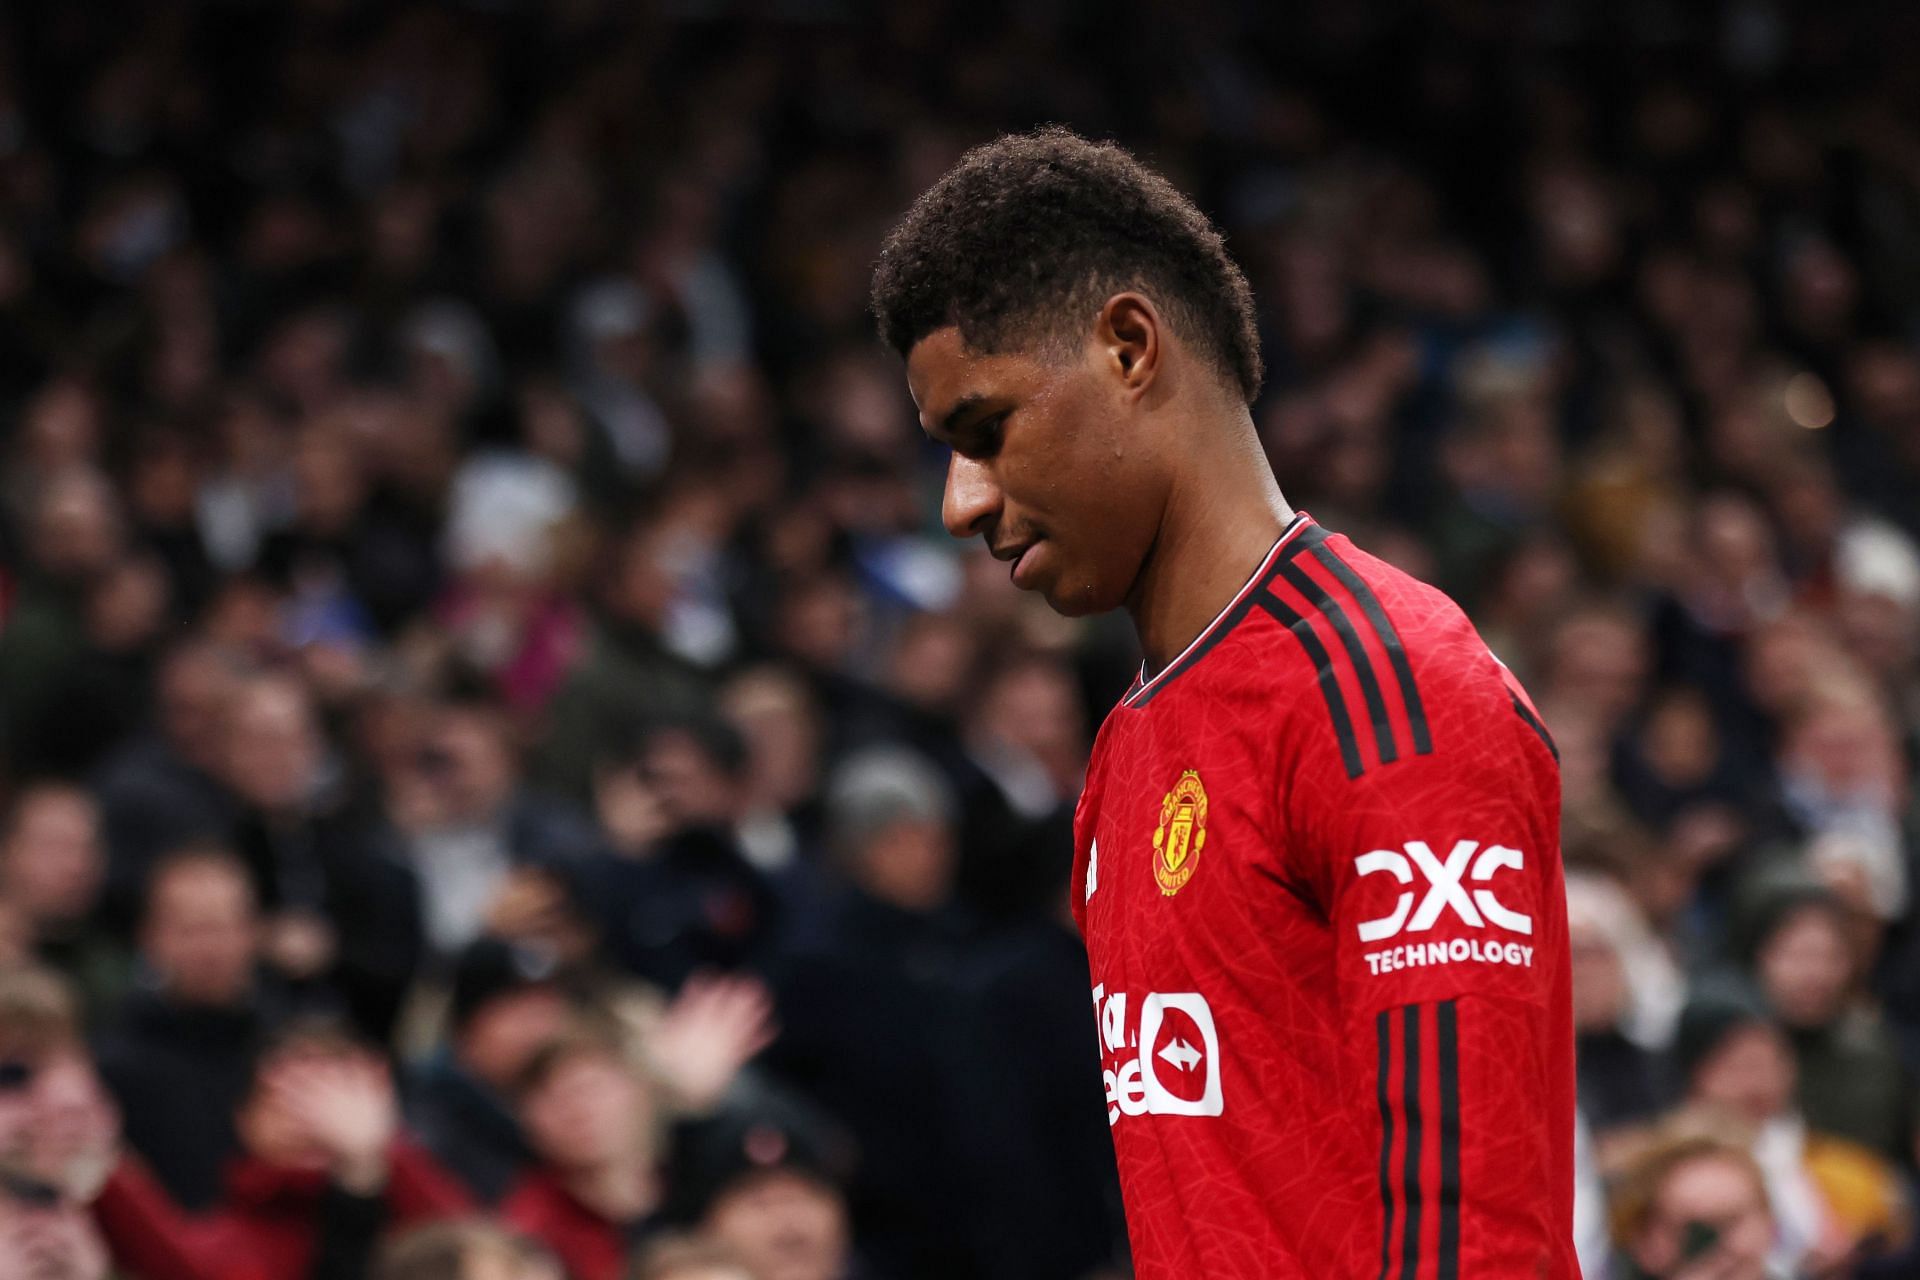 Manchester United are looking to support Rashford.